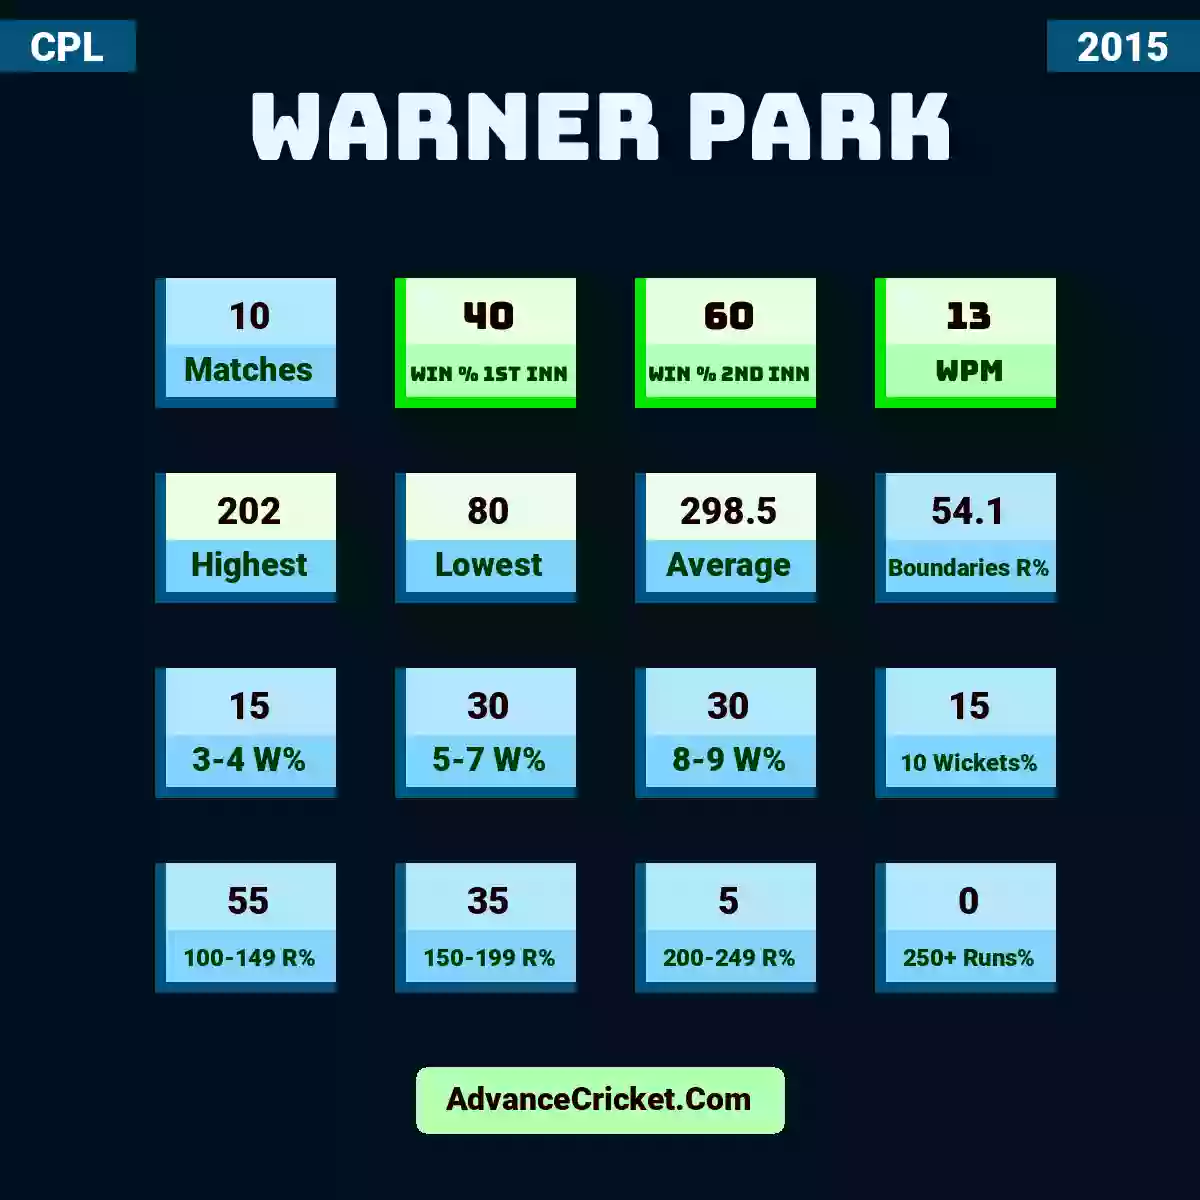 Image showing Warner Park with Matches: 10, Win % 1st Inn: 40, Win % 2nd Inn: 60, WPM: 13, Highest: 202, Lowest: 80, Average: 298.5, Boundaries R%: 54.1, 3-4 W%: 15, 5-7 W%: 30, 8-9 W%: 30, 10 Wickets%: 15, 100-149 R%: 55, 150-199 R%: 35, 200-249 R%: 5, 250+ Runs%: 0.